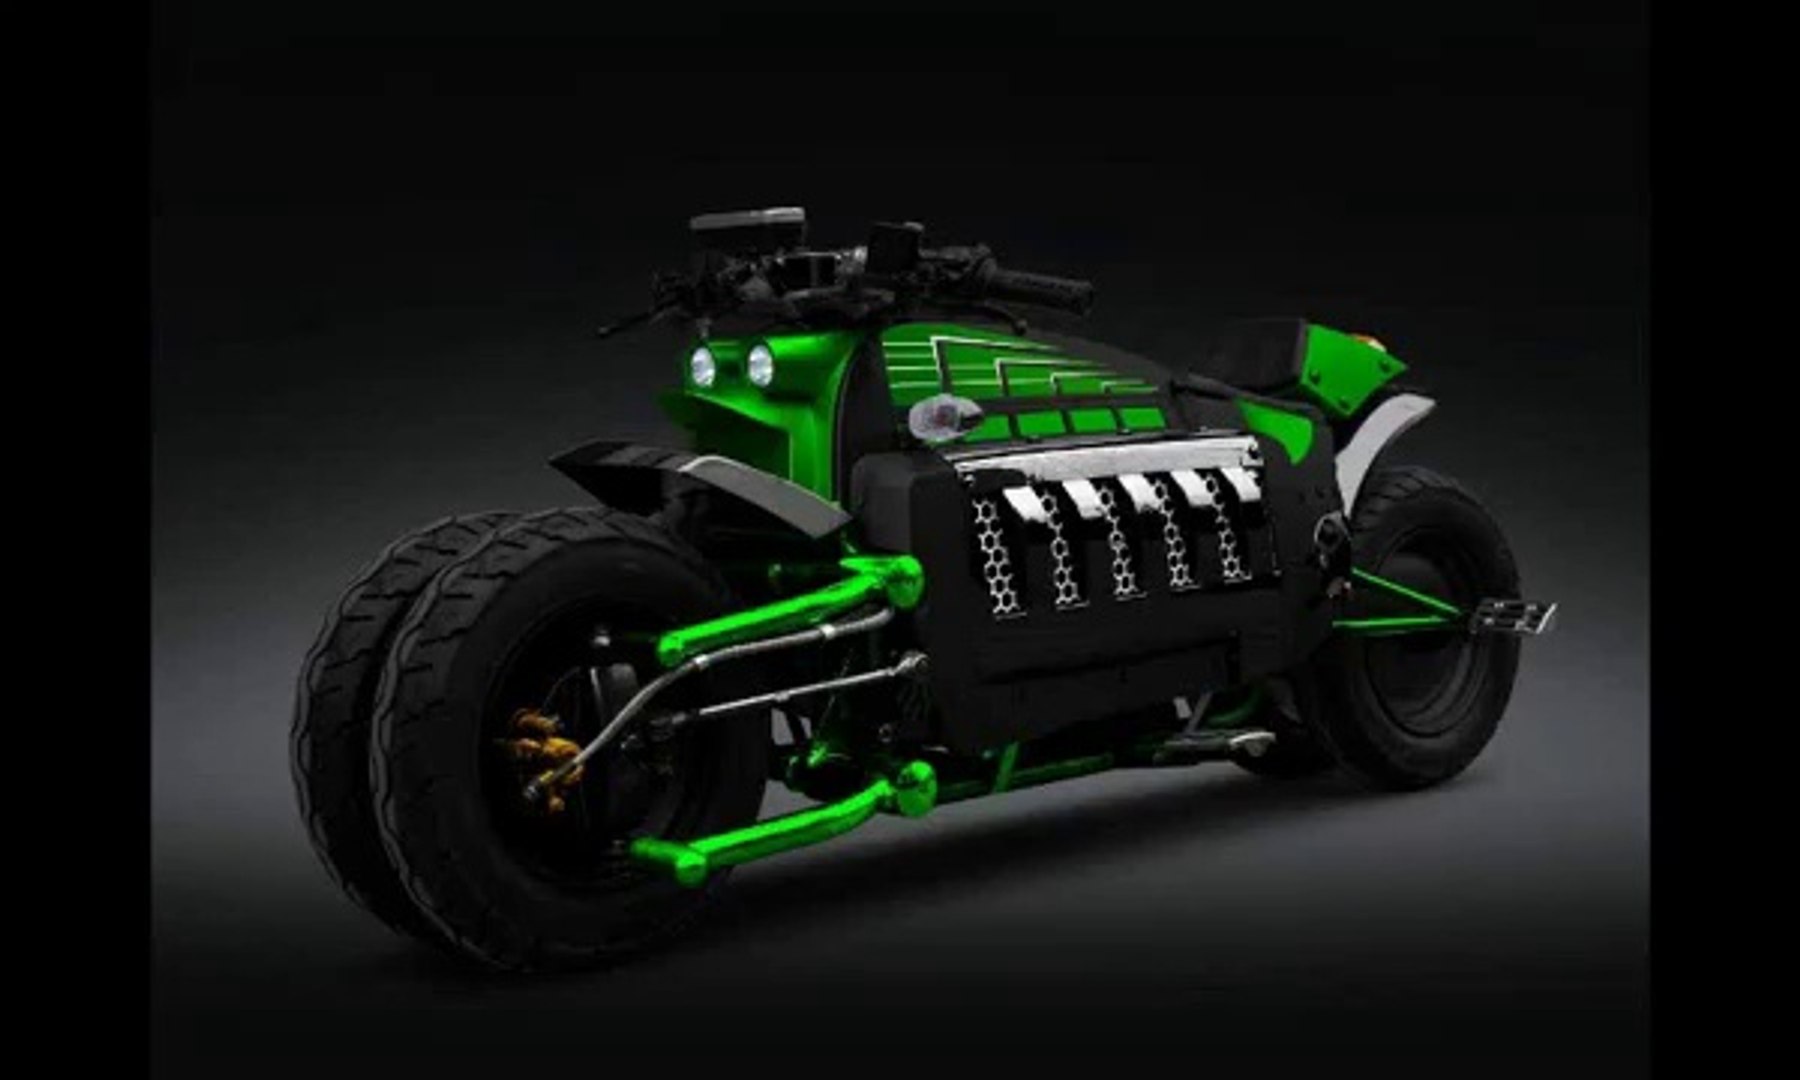 Dodge Tomahawk The Most Powerful & Fastest Bike In The World 2017 - 2018  Photo Review - video Dailymotion